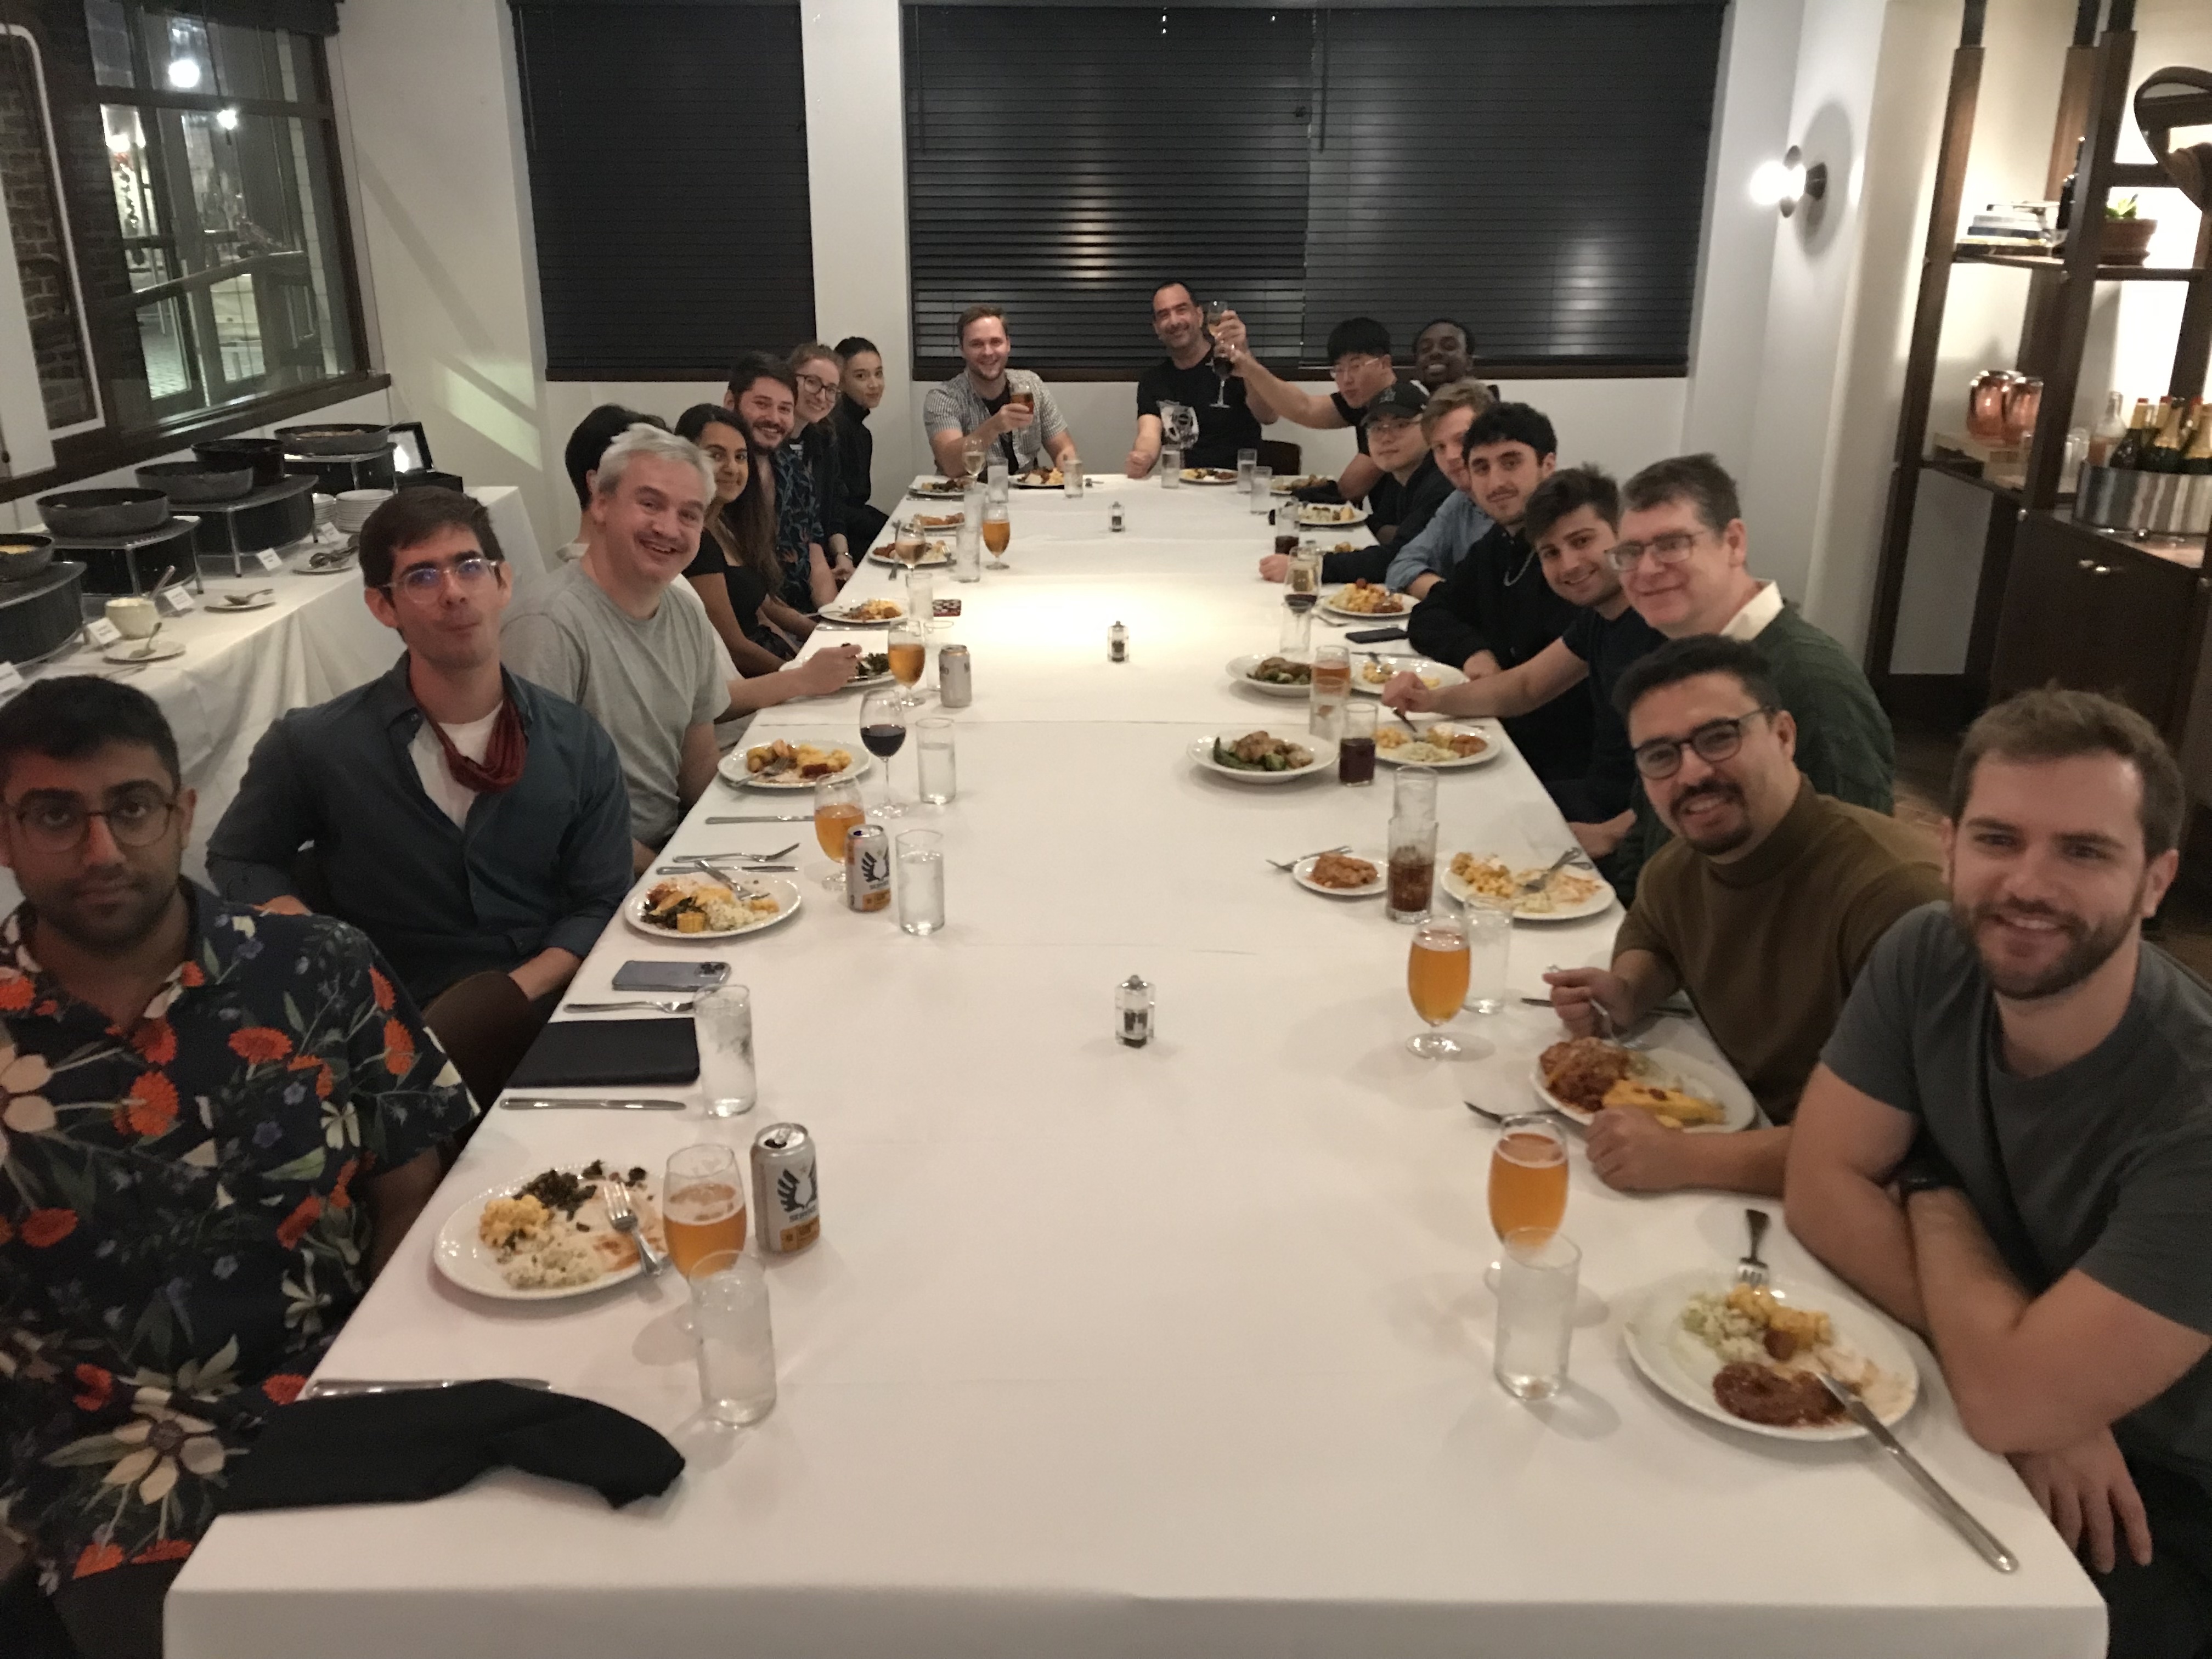 Members of Enigma's engineering and data science teams gathered for dinner during their retreat in Savannah.